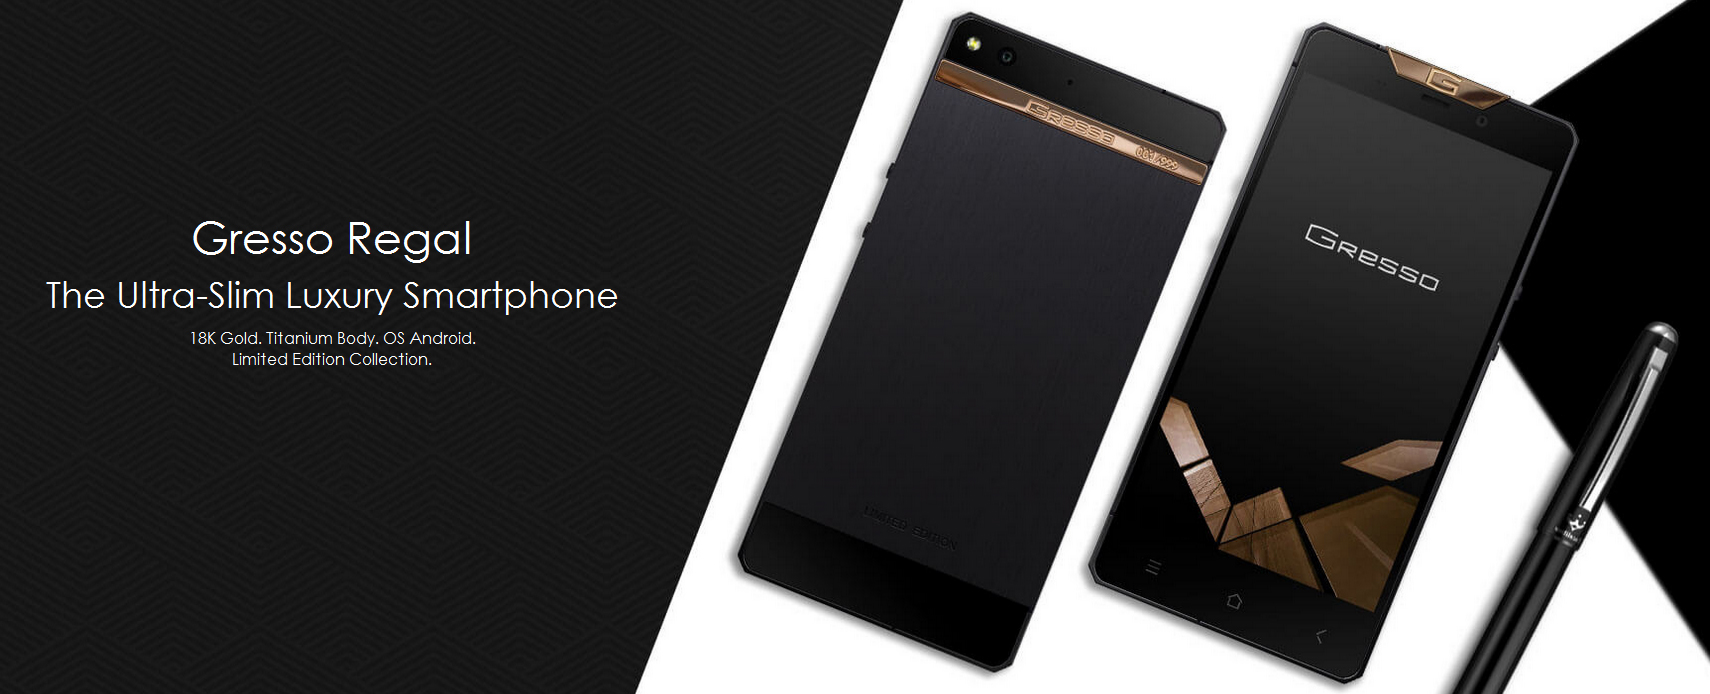 Luxury Feature Phones & Smartphones for the Richie Rich